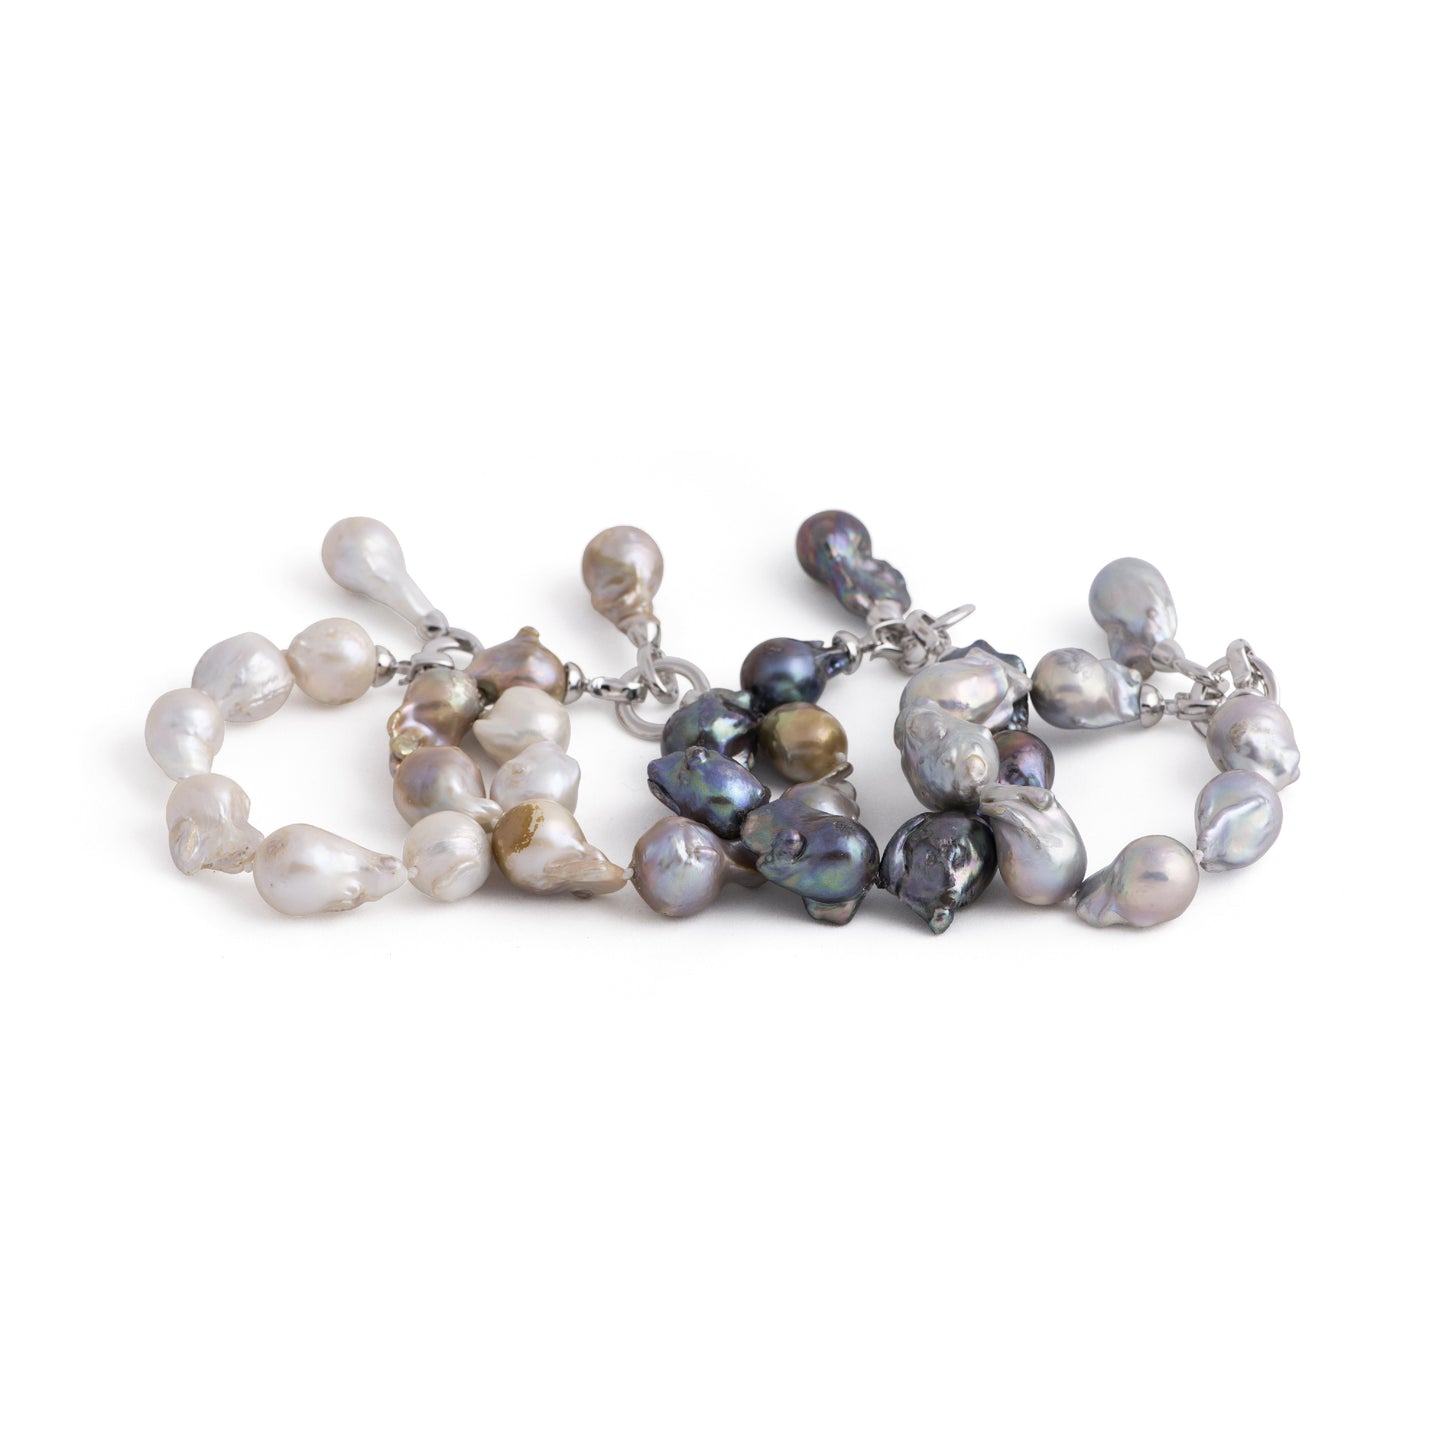 Nile - Baroque pearl charm bracelet (All 4 colors)